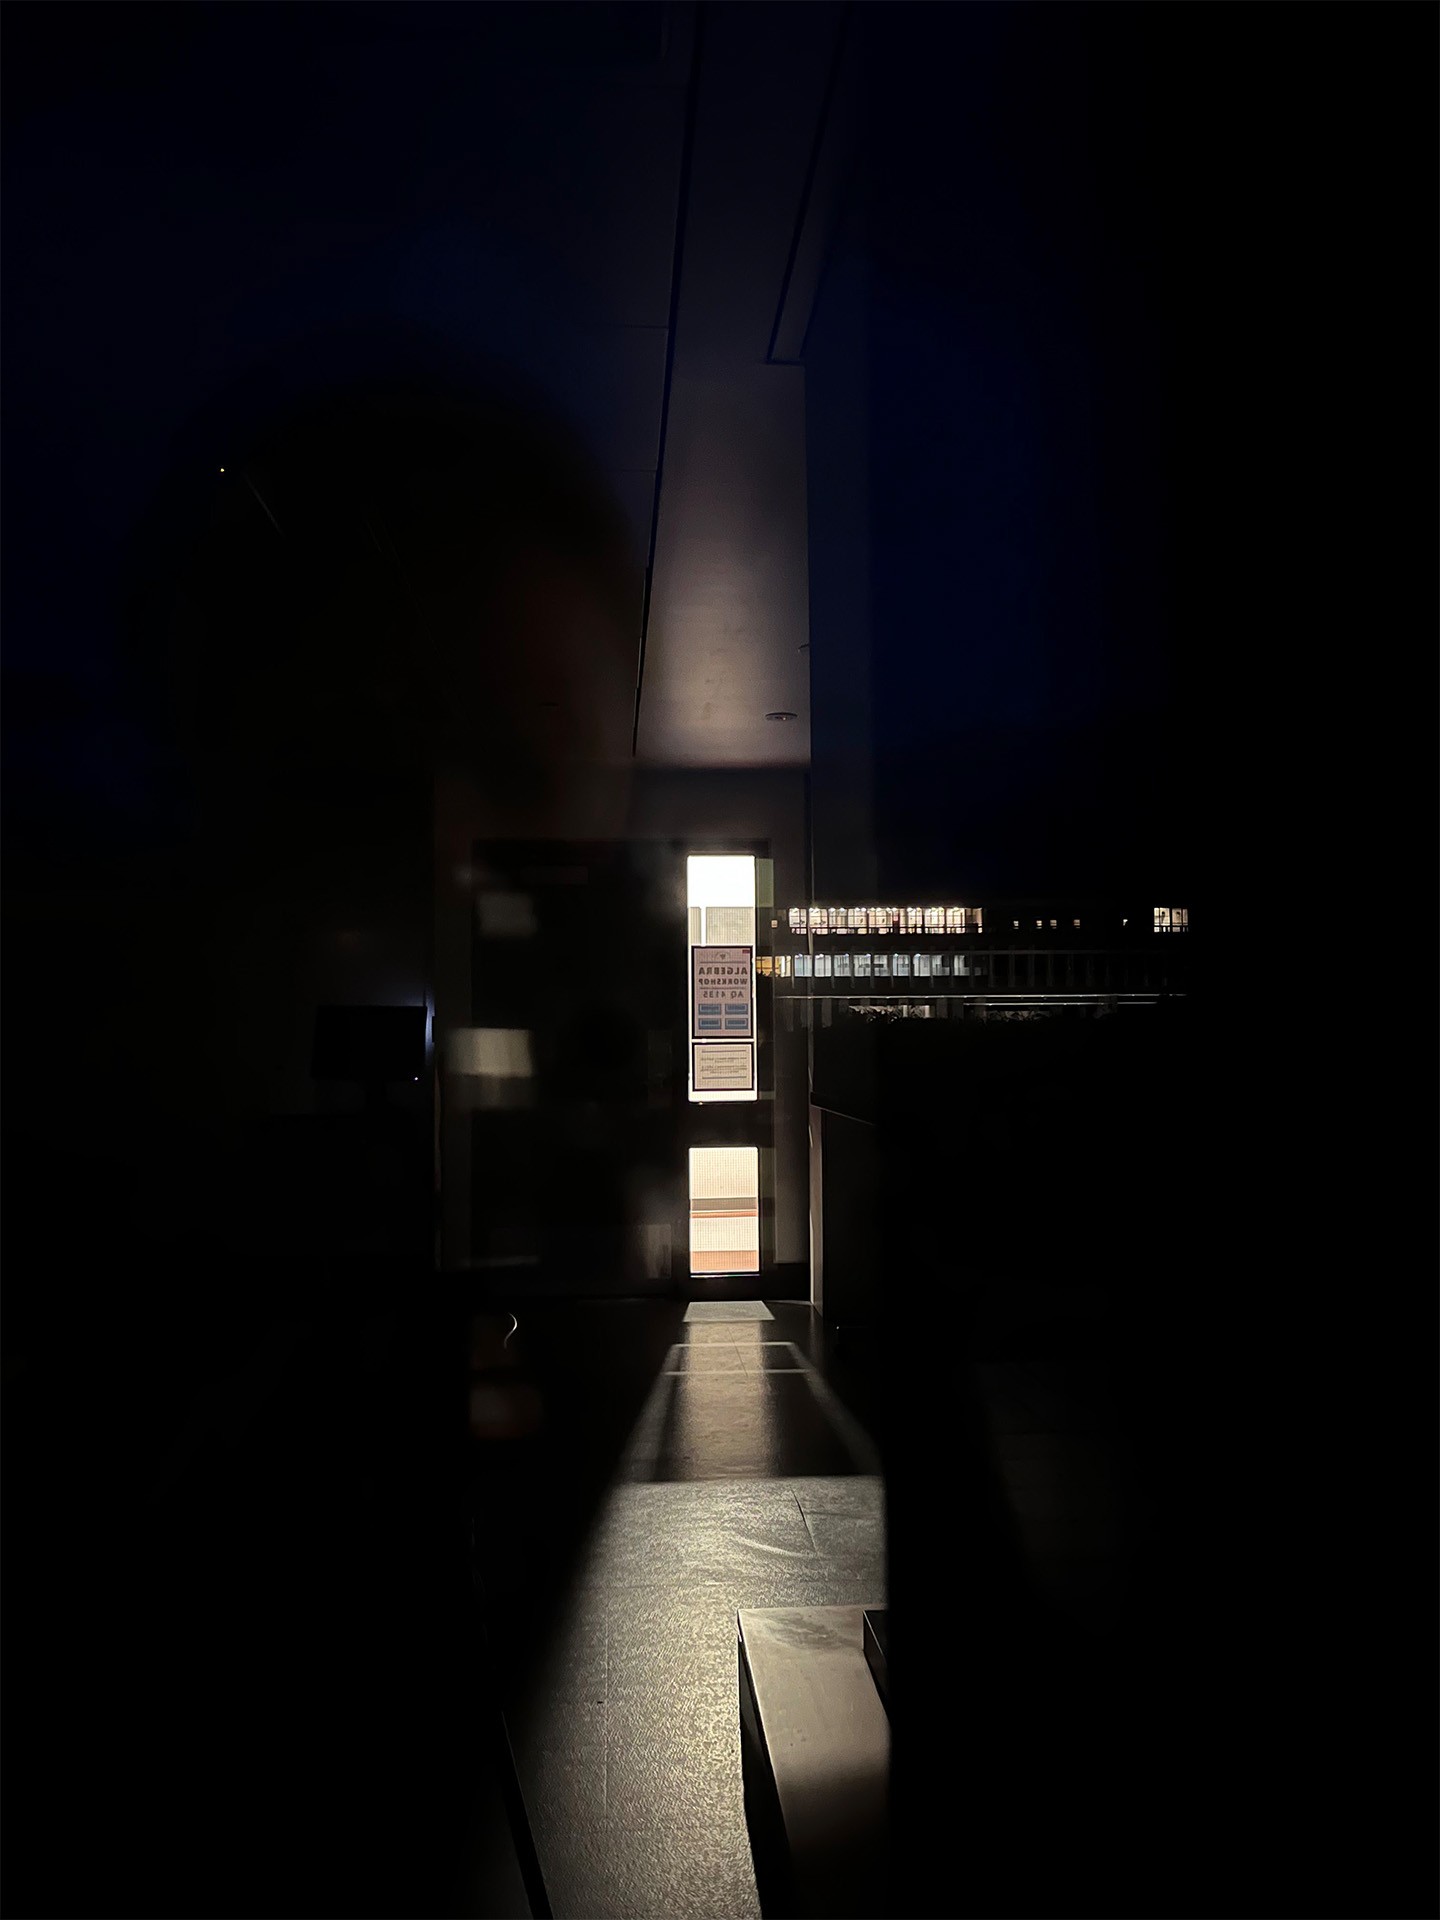 A photo of a dark classroom, the only light coming from the lit hallway beyond the door.